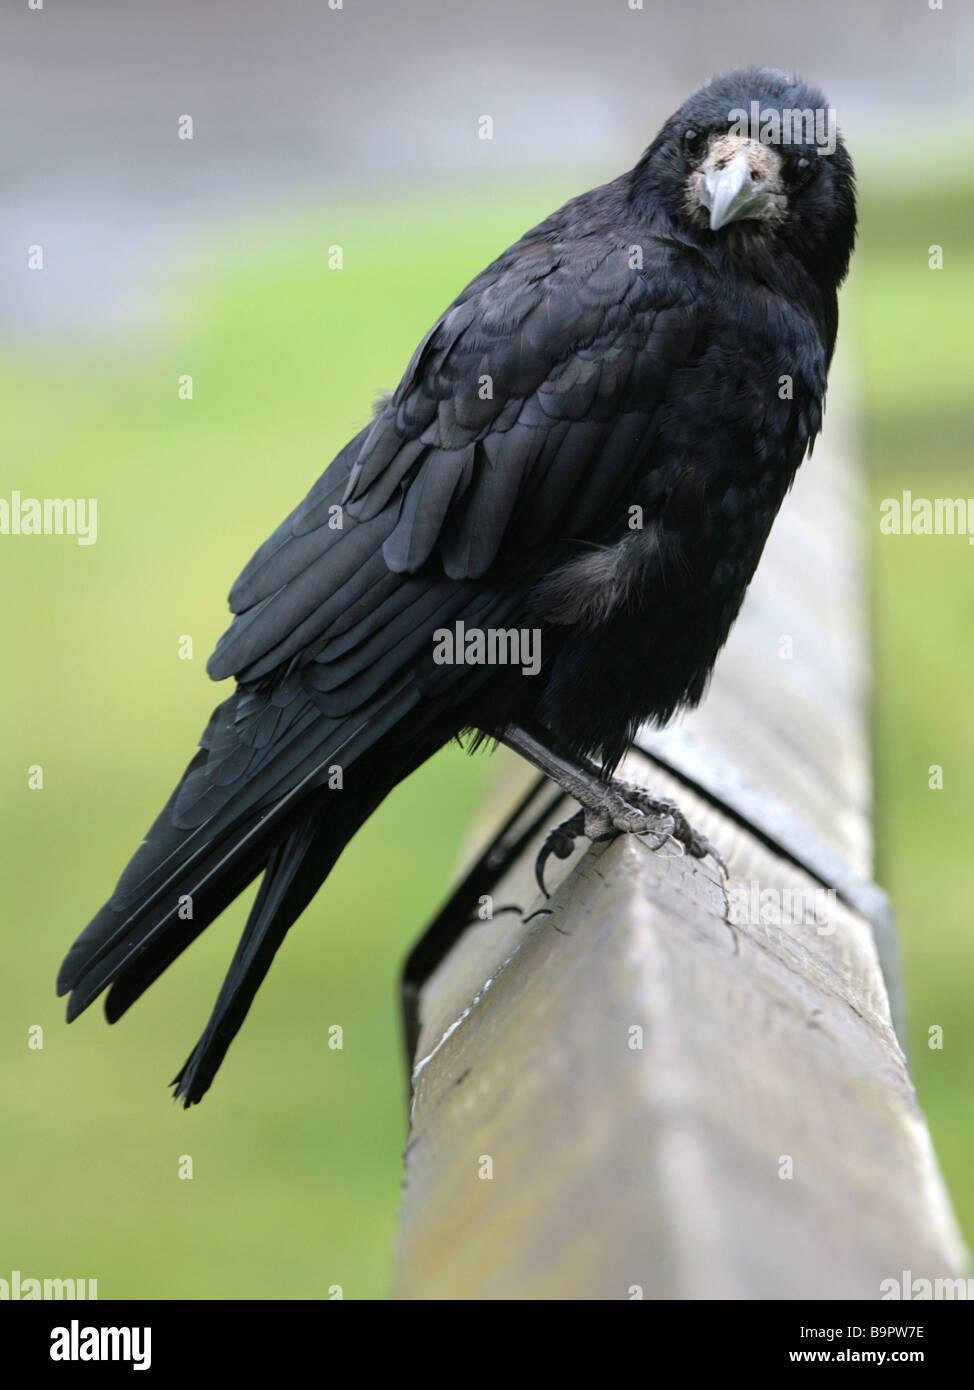 A rook perched sitting on a fence. Stock Photo